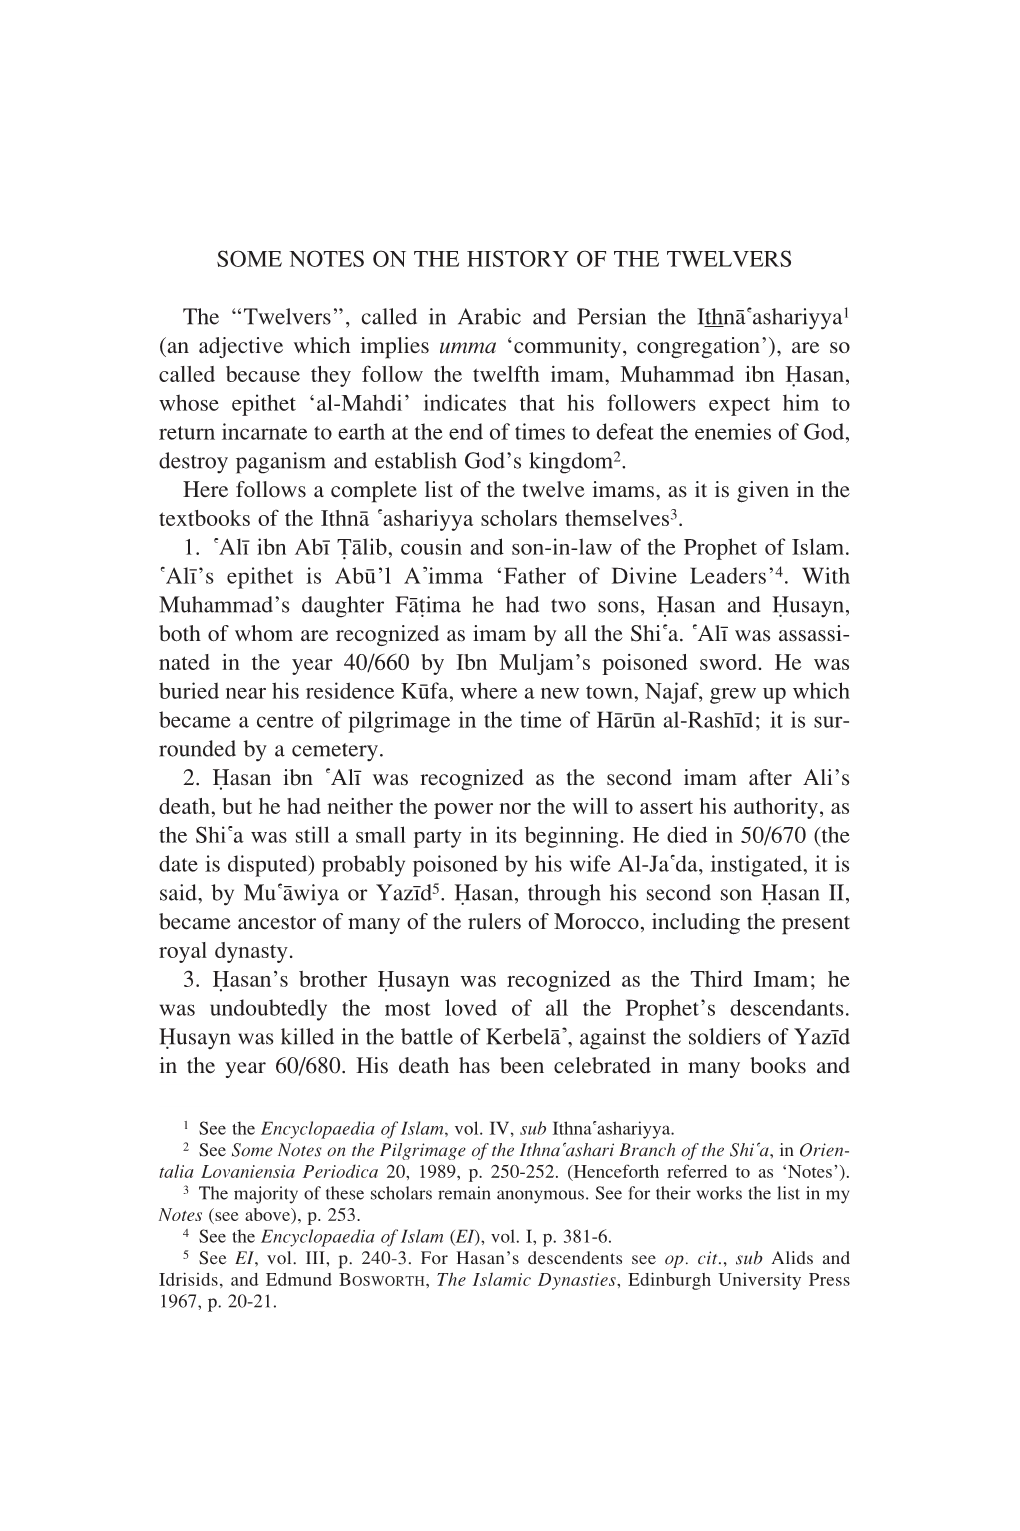 SOME NOTES on the HISTORY of the TWELVERS the “Twelvers